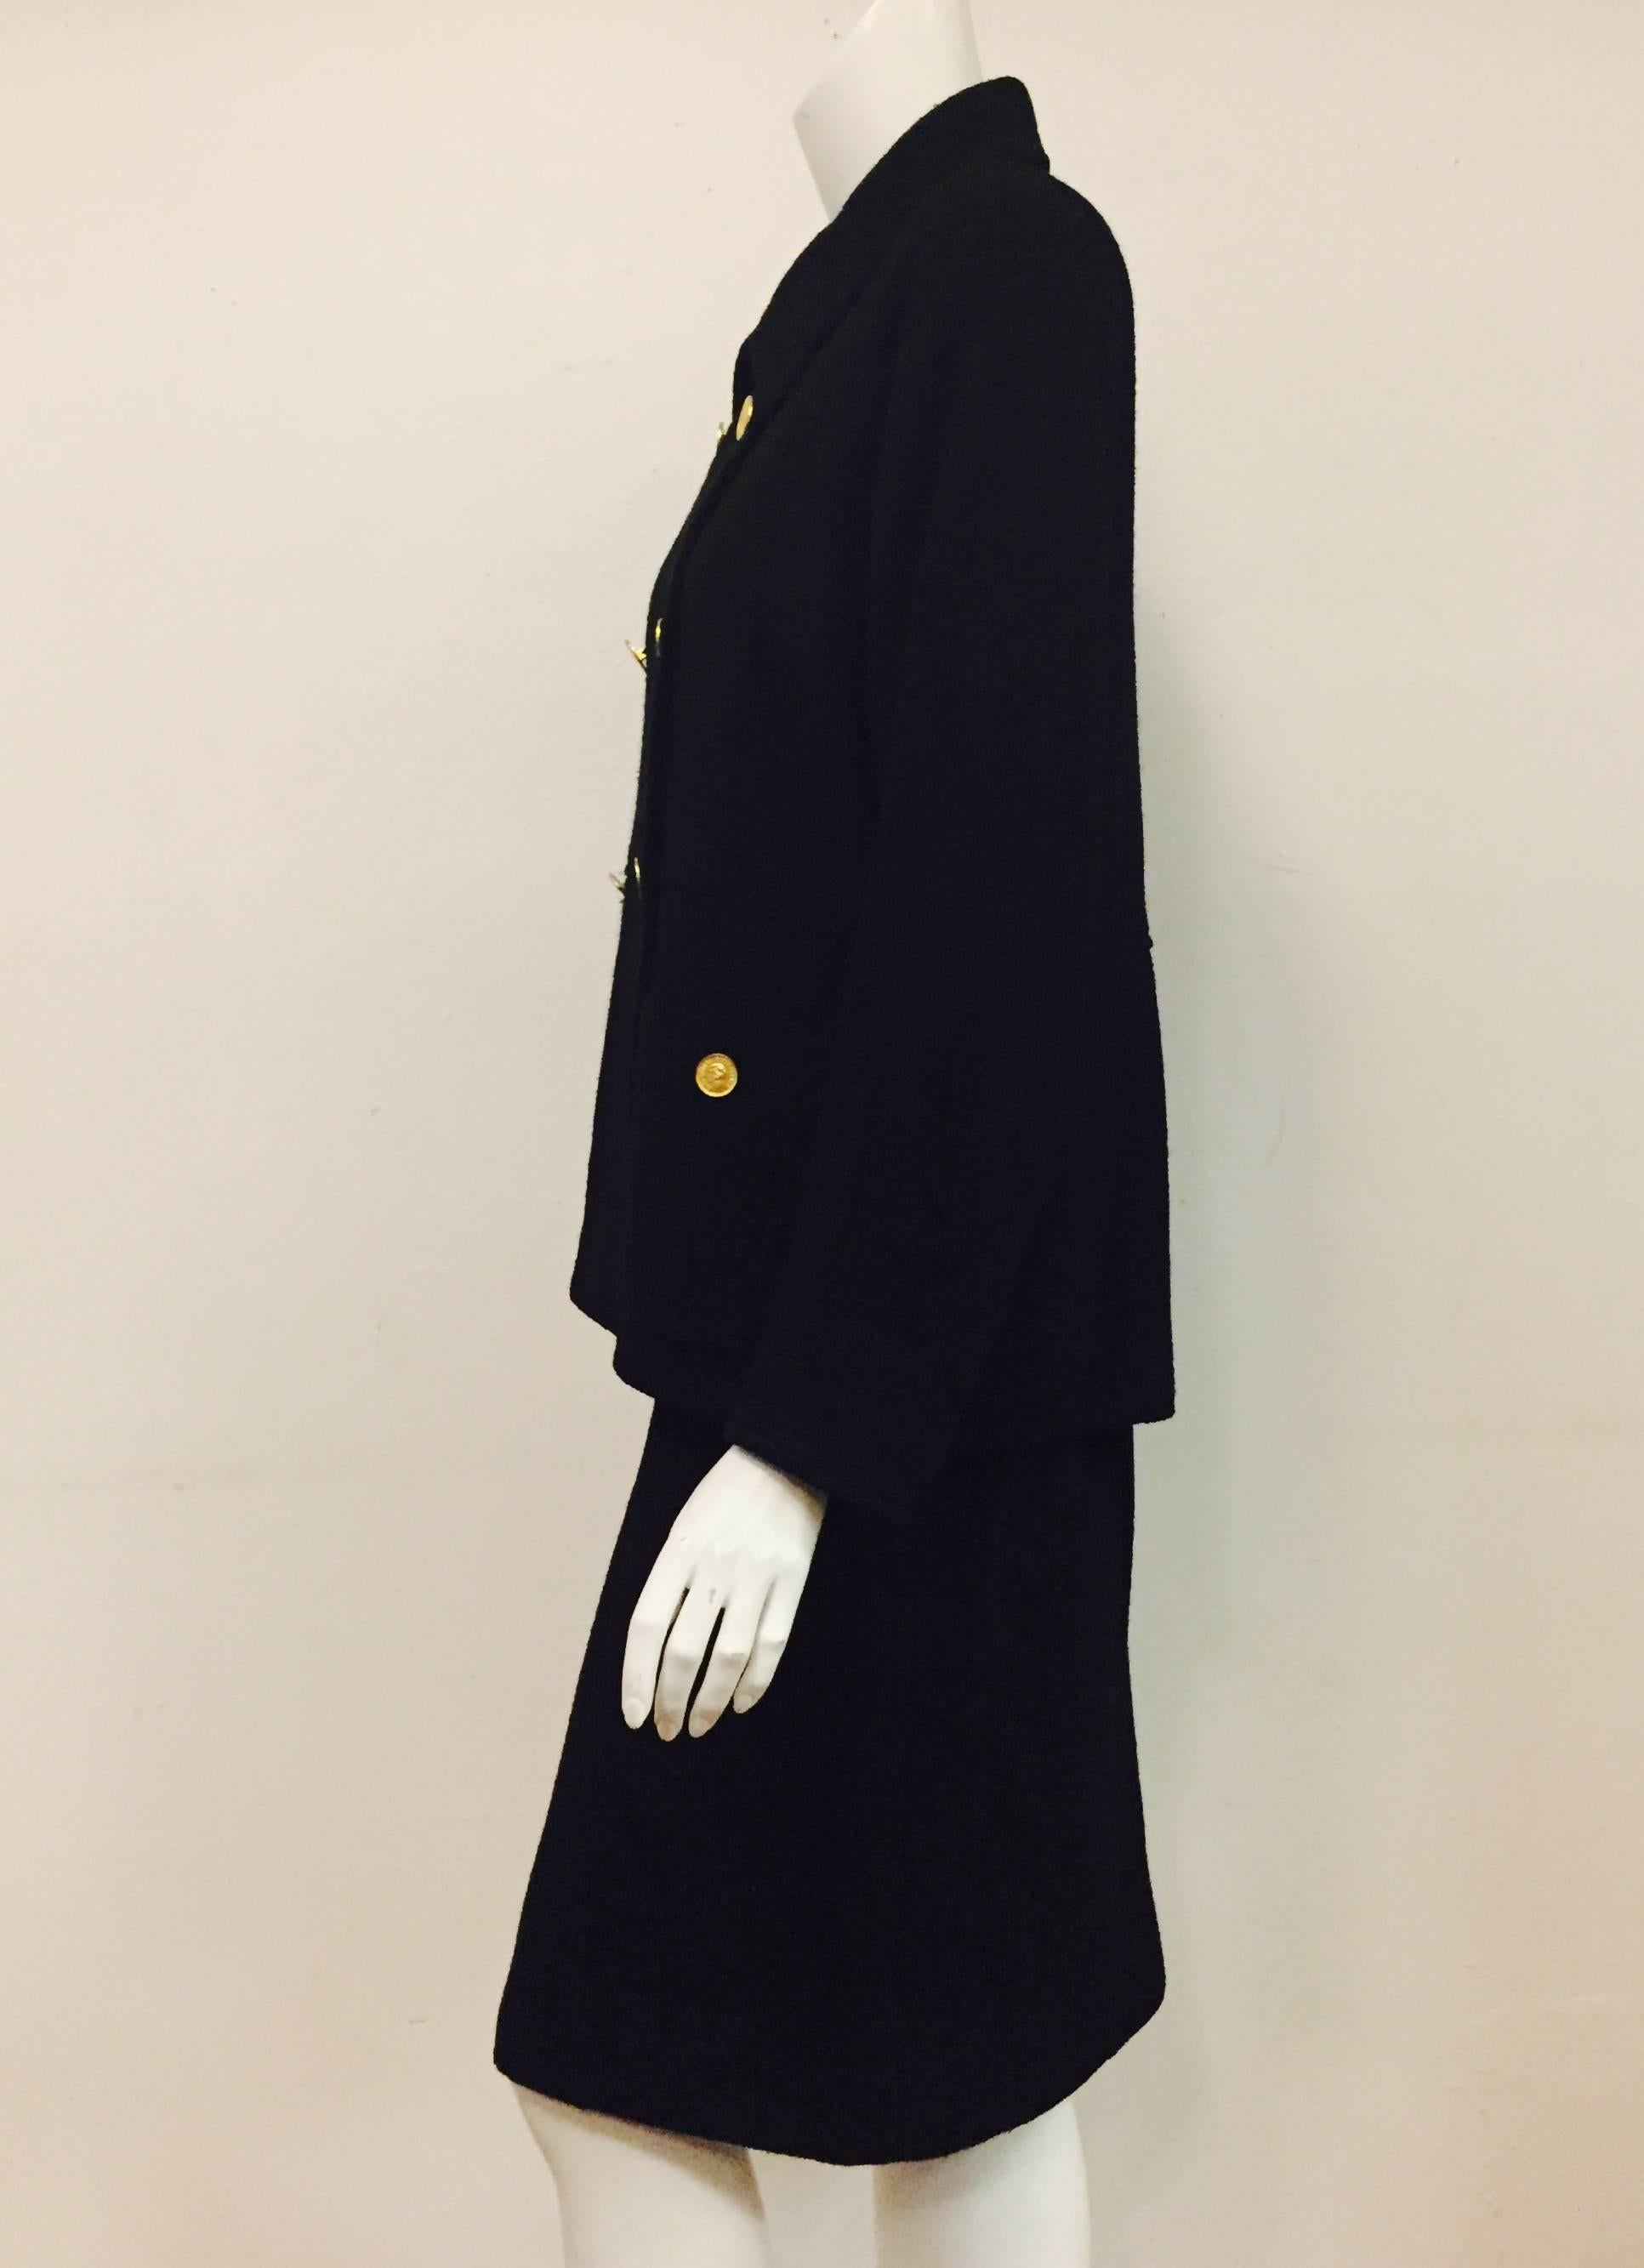 Women's Classic Chanel Boutique Black Skirt Suit with Iconic Goldtone Profile Buttons For Sale